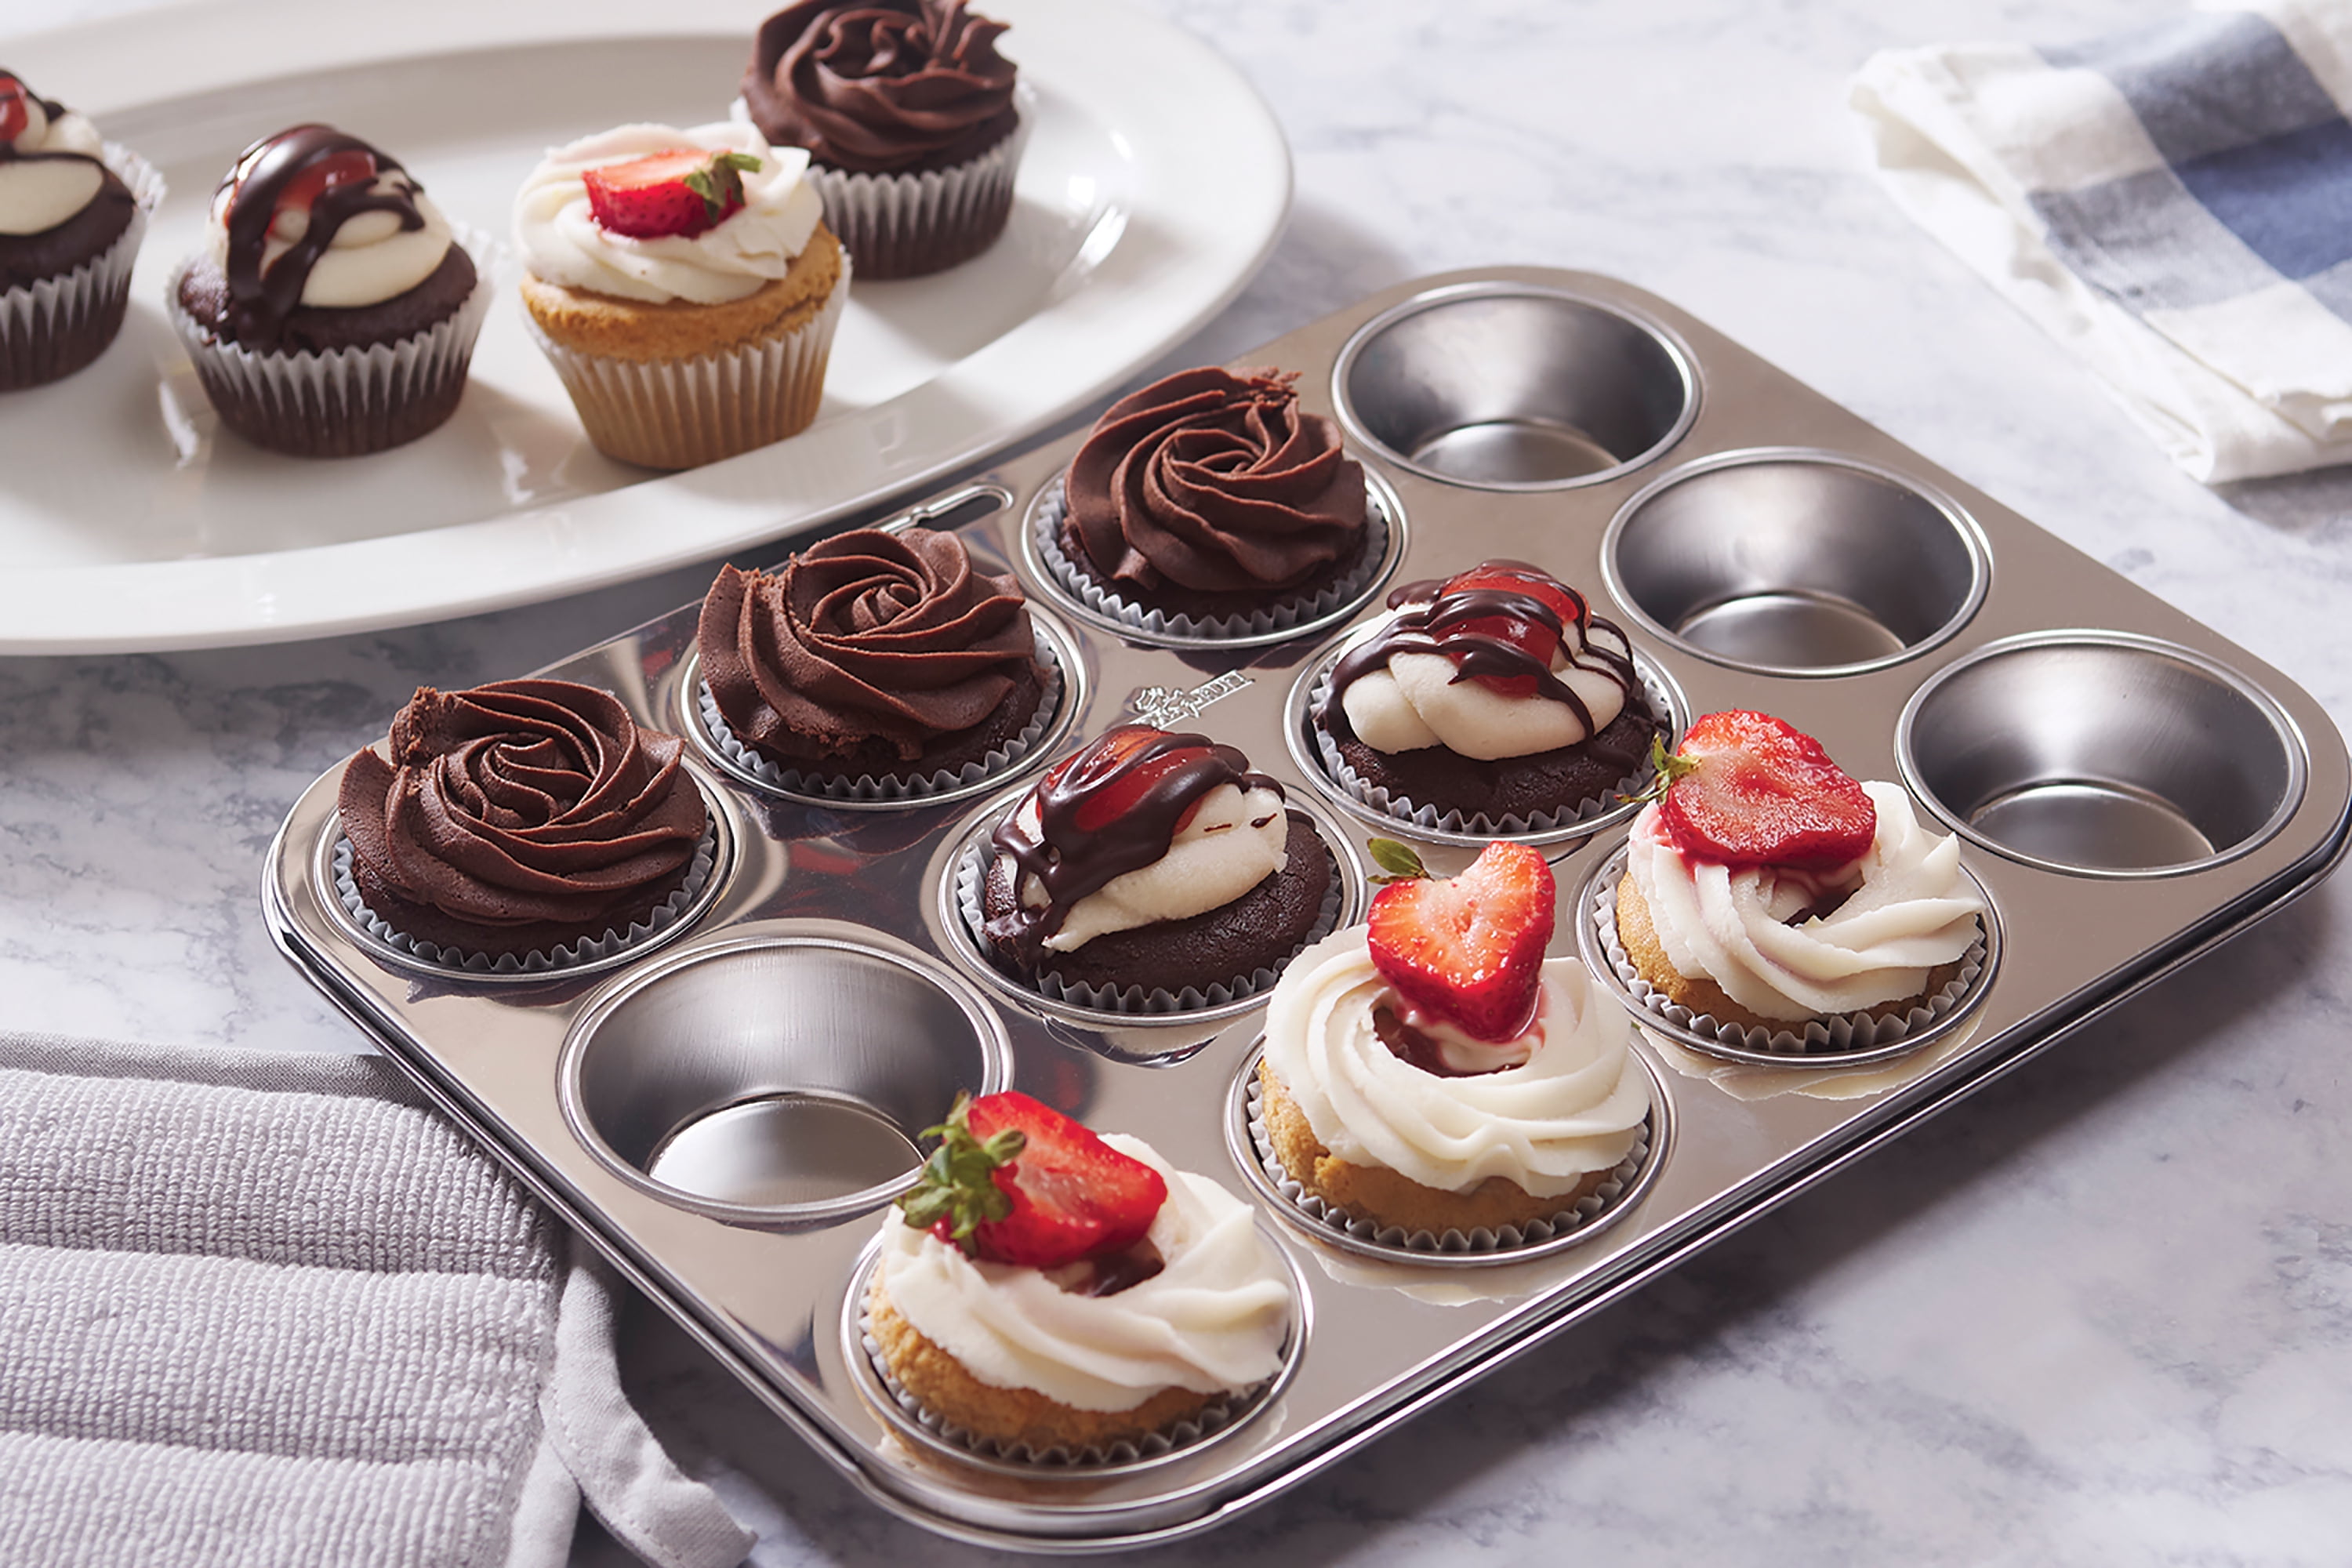 E-far Muffin Pan 12-Cup, Set of 2, Stainless Steel Cupcake Pan Metal Muffin  Baking Tins for Oven, Regular Size & Easy Clean, Non-toxic & Dishwasher